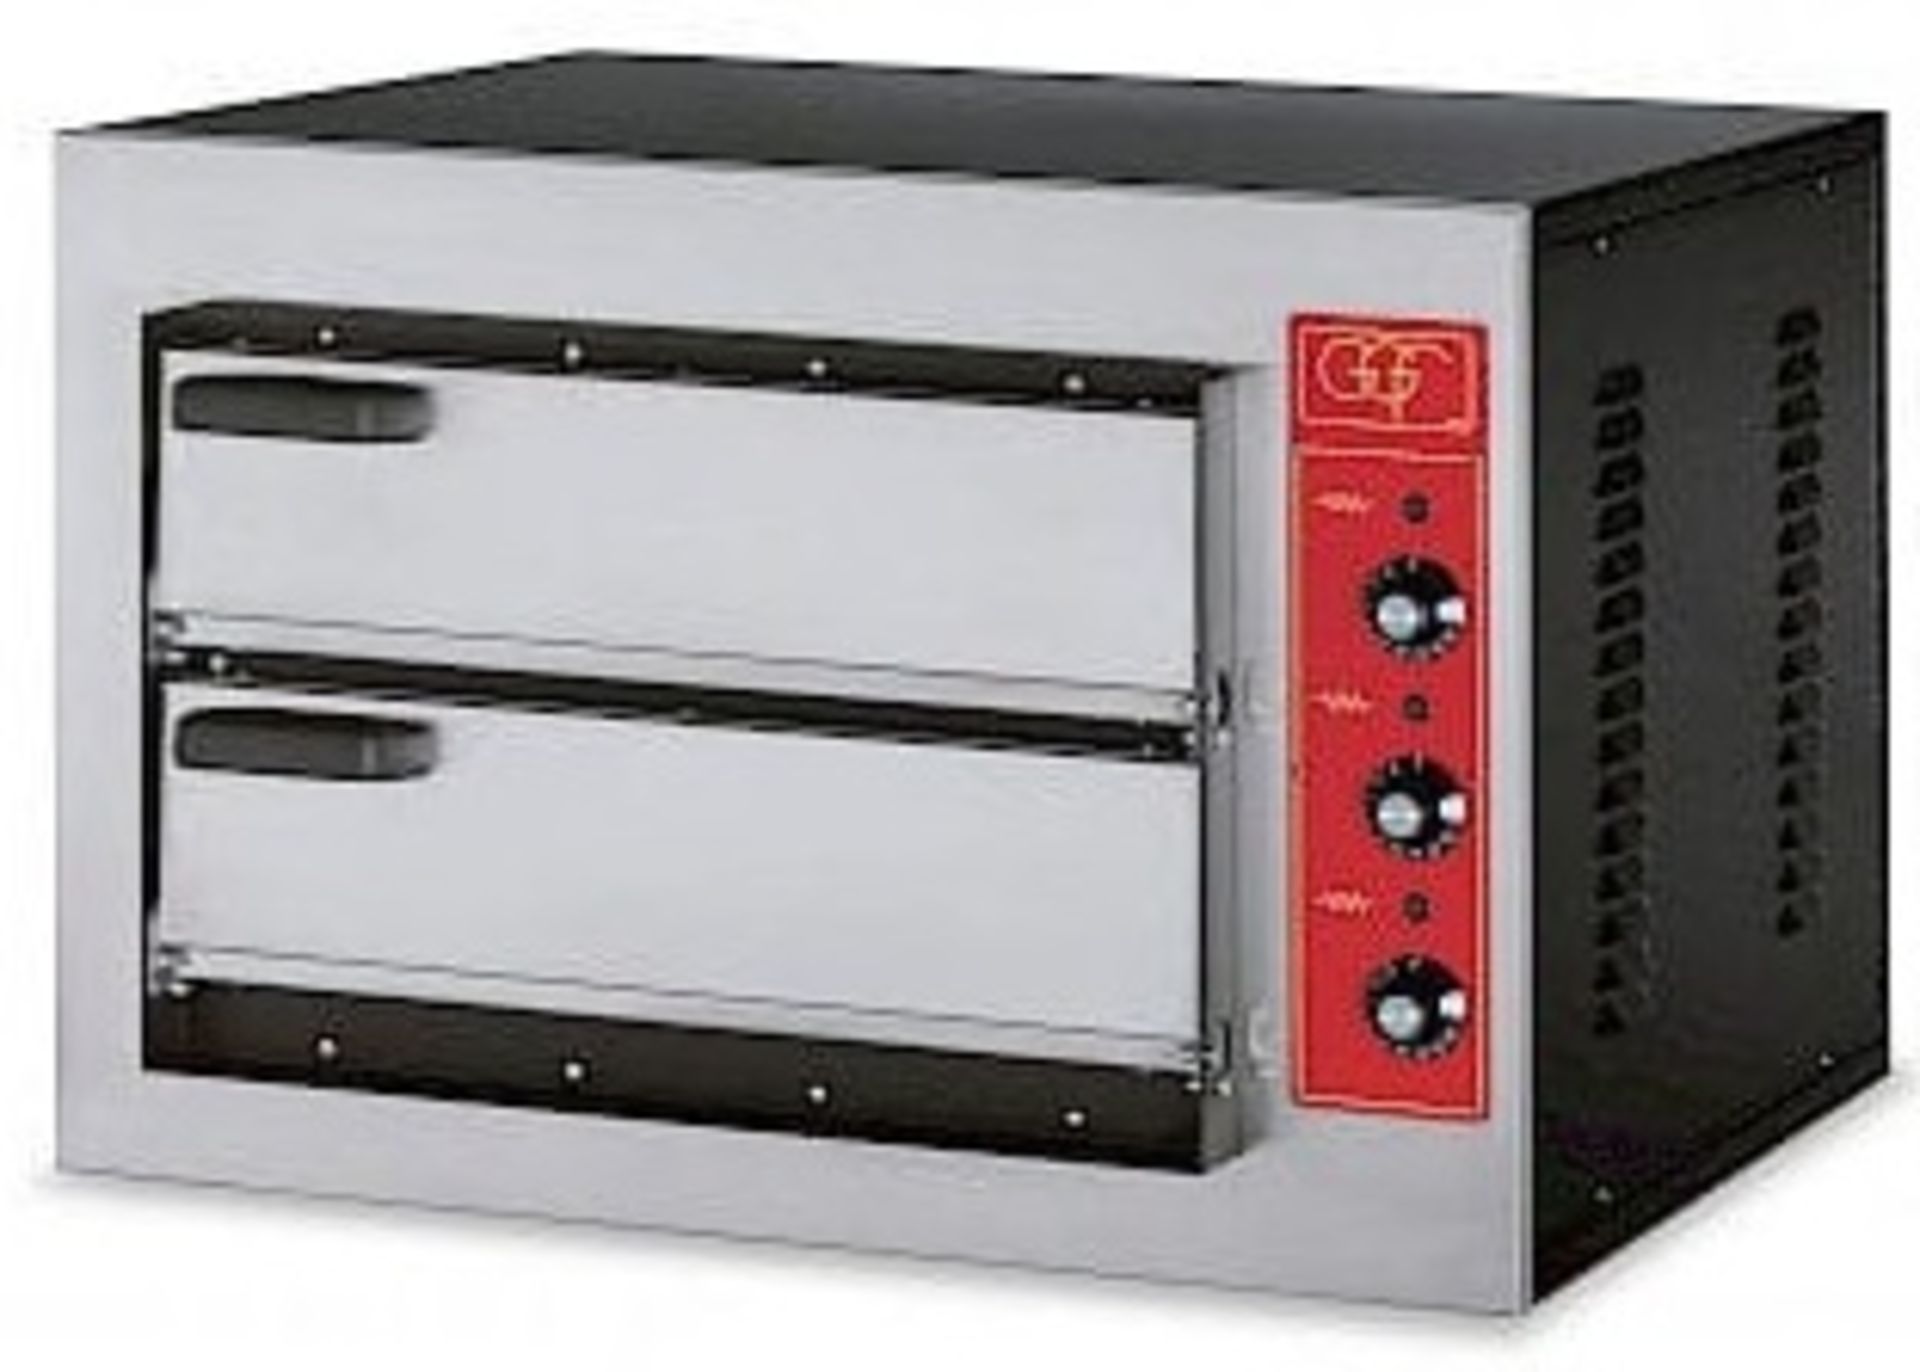 1 x Commercial Electric Built-in Pizza Oven With Fixed Rack (Model: Mini 3T) - Made In Italy -